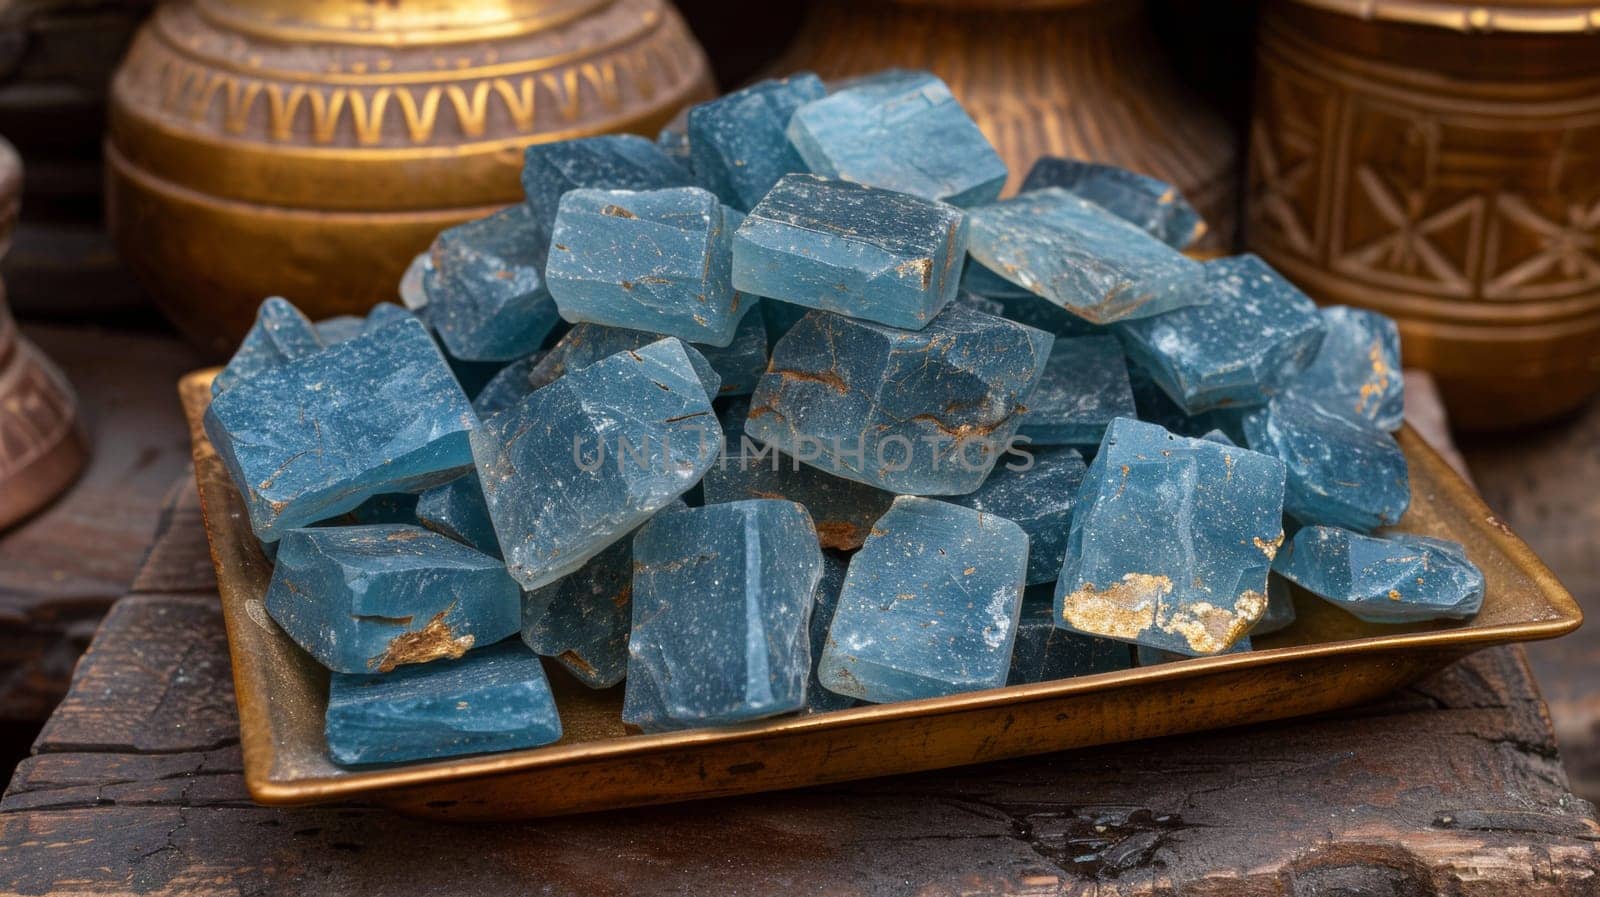 A plate of blue stones sitting on top of a wooden table, AI by starush